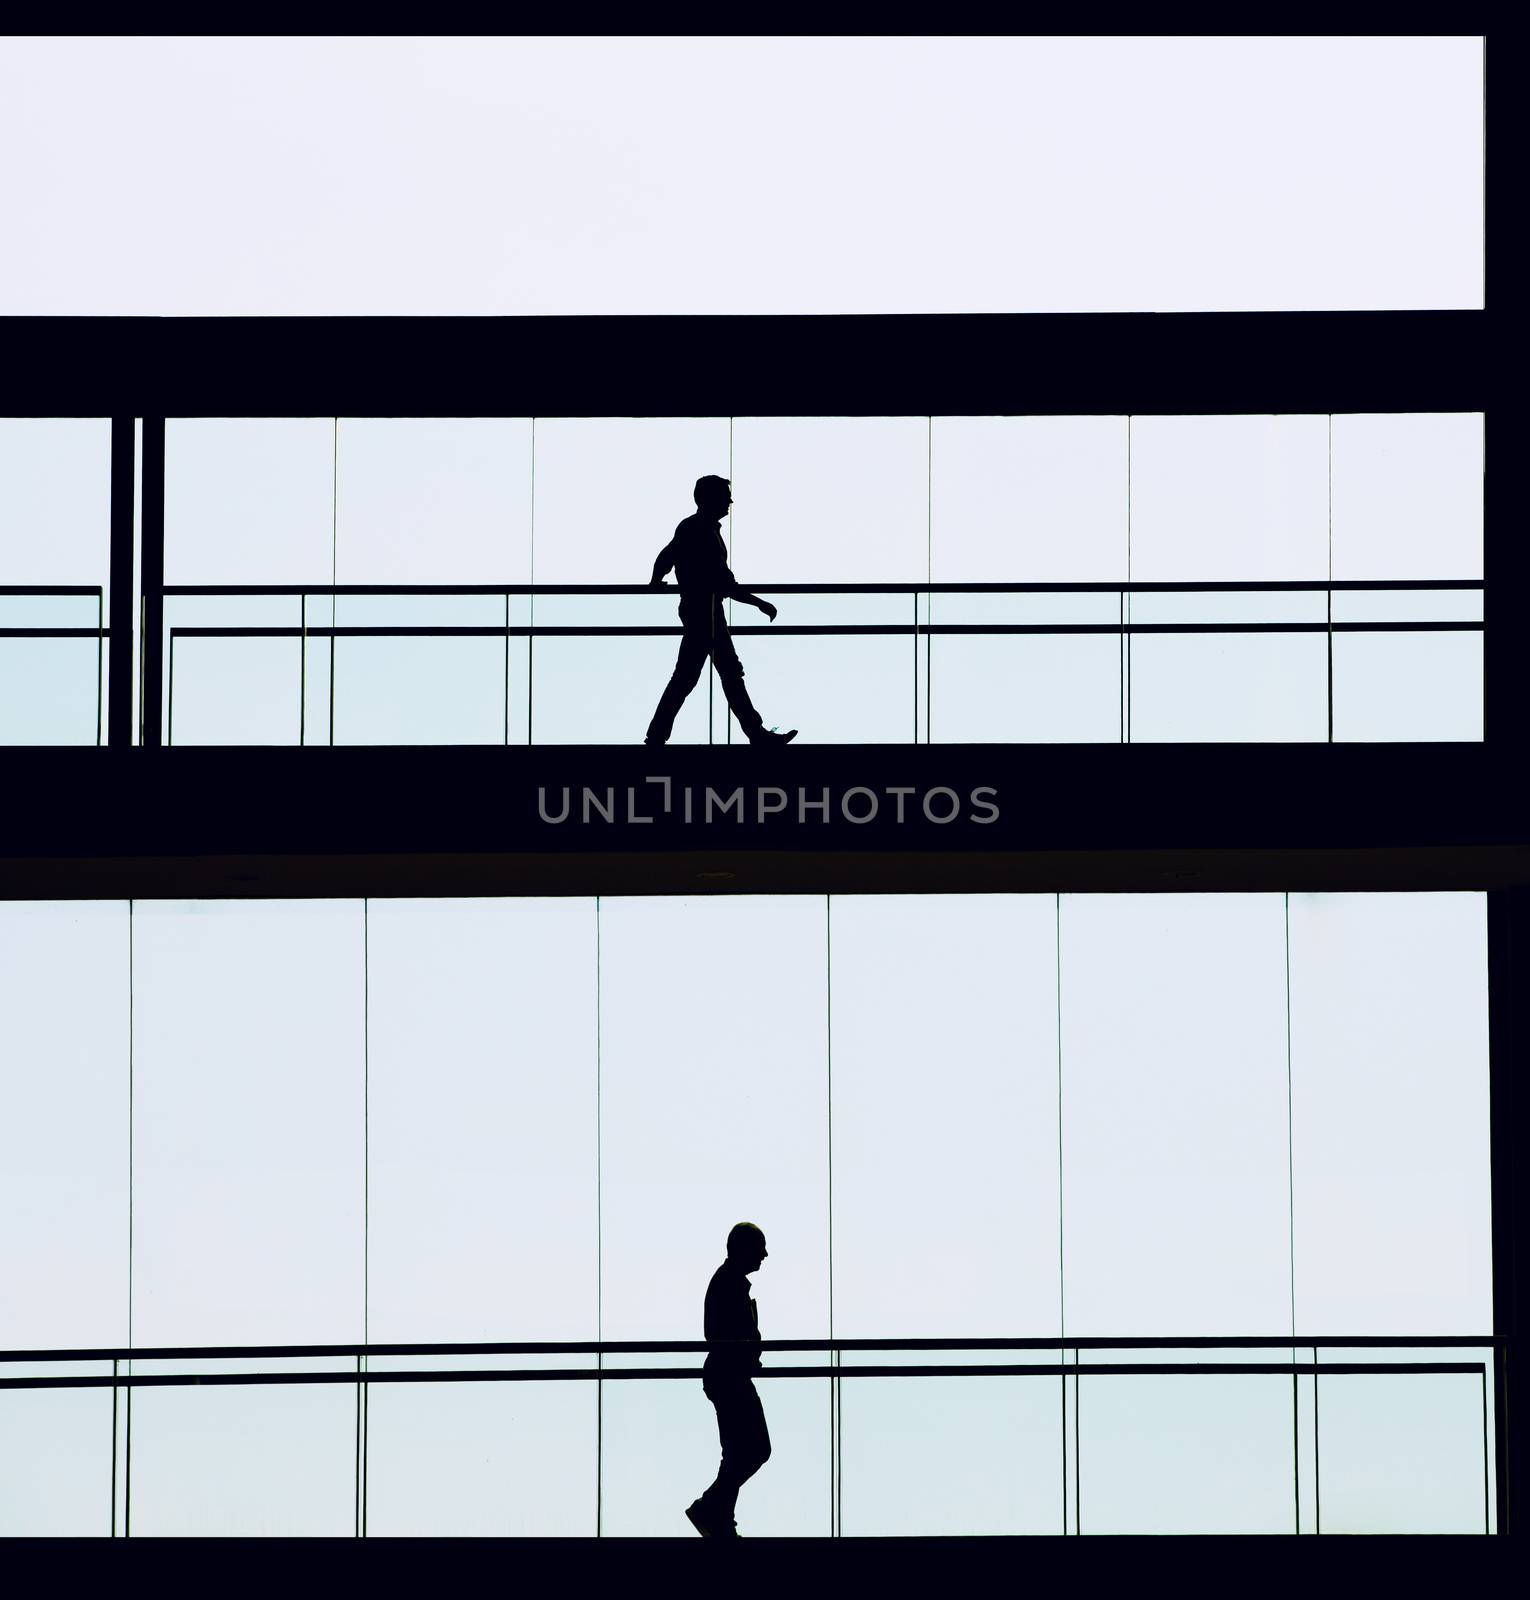 Silhouette view of two businessmen in a modern office building interior with panoramic windows.